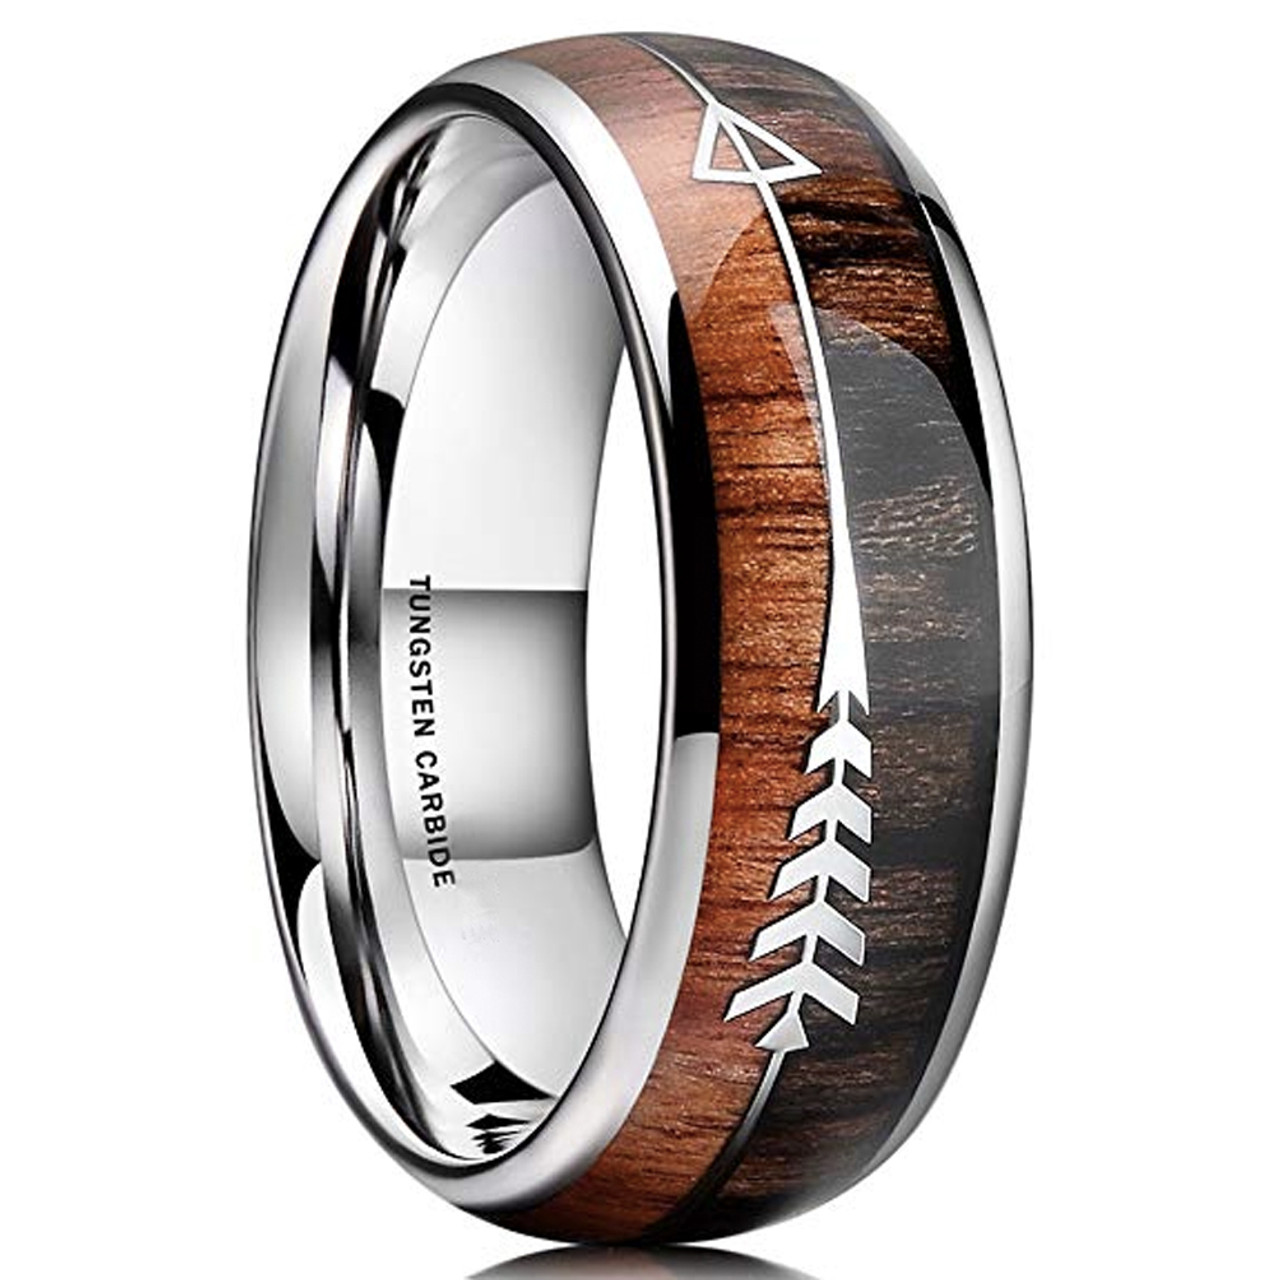 8mm - Unisex or Men's Tungsten Wedding Bands. Silver Cupid's Arrow over Wood Inlay. Tungsten Ring with High Polish Dark Wood Inlay. Domed Top Ring.